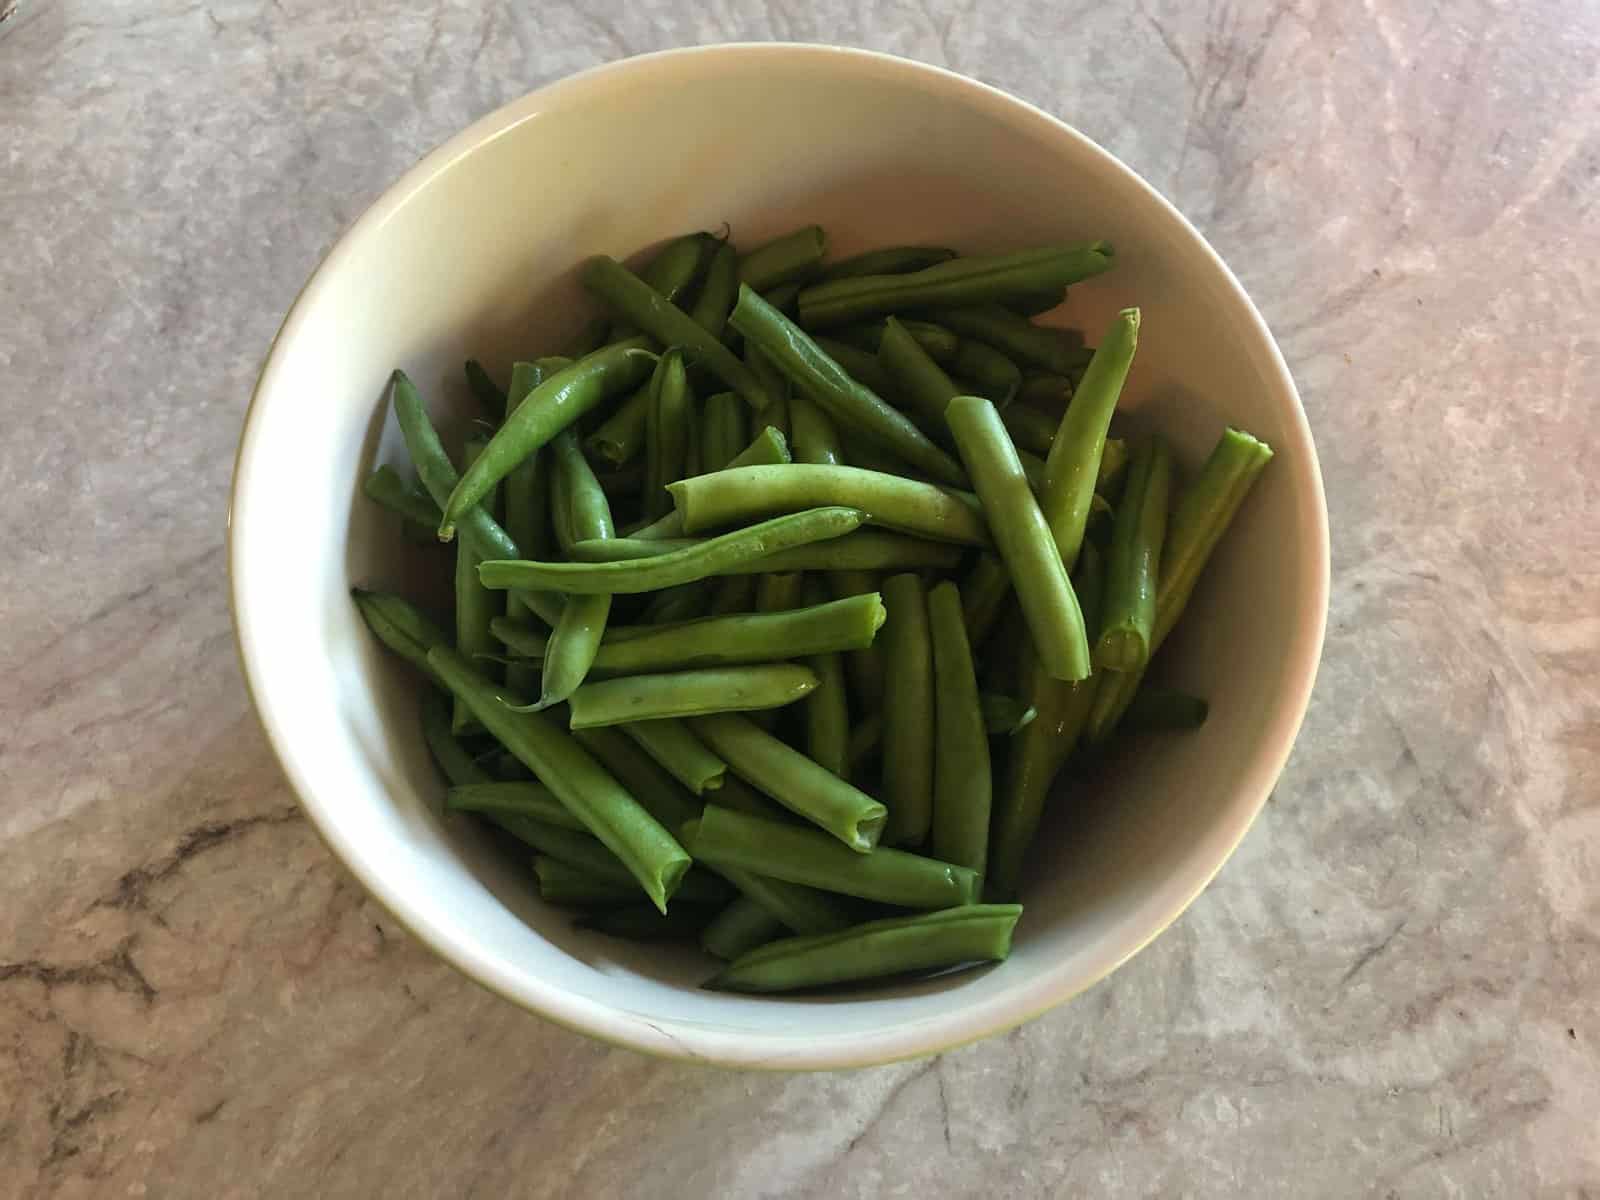 bowl of washed, snapped green beans
